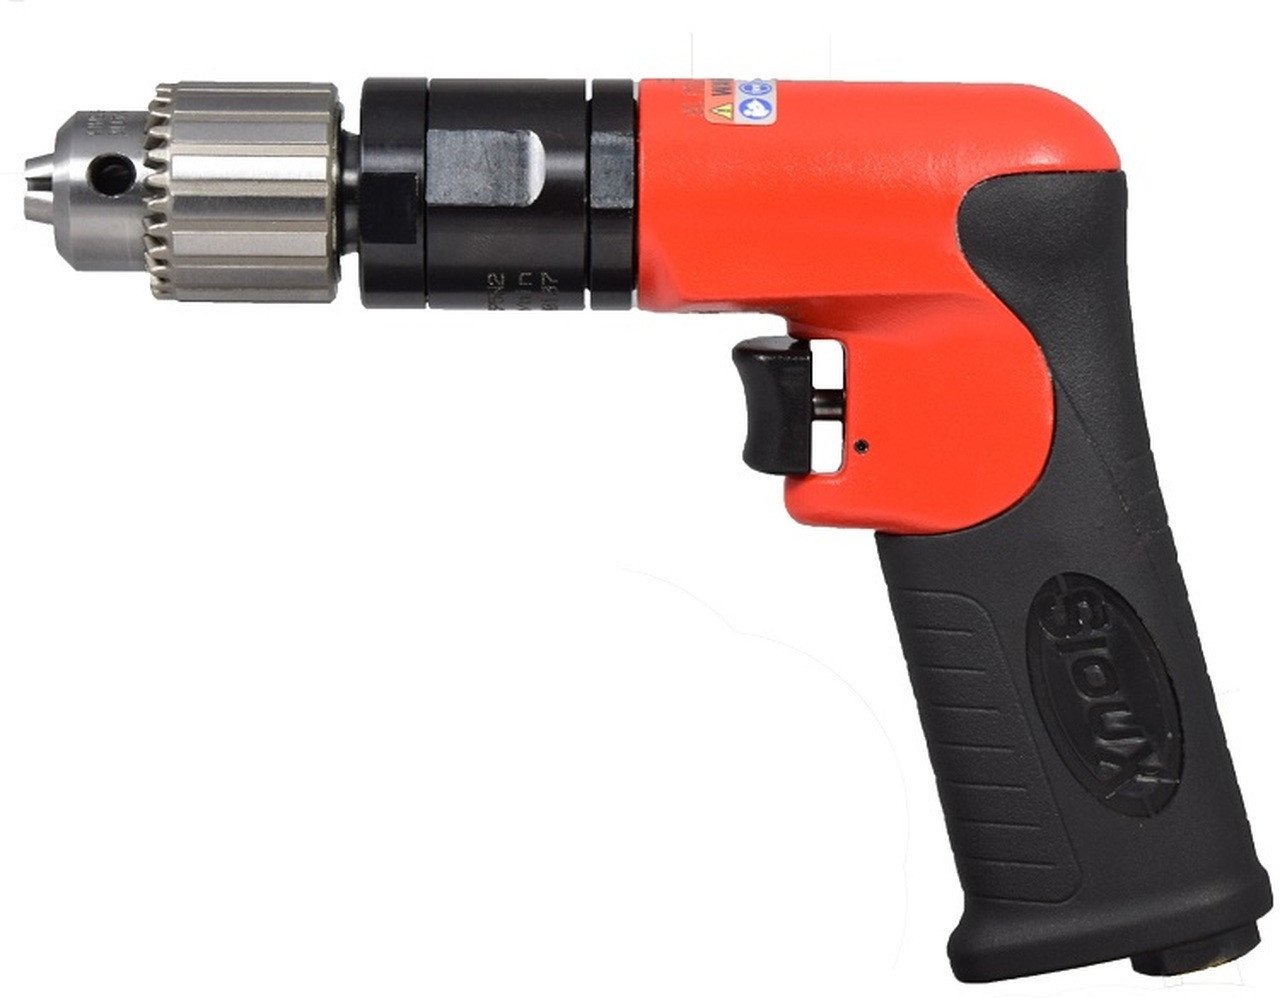 Sioux Tools SDR5P12N2 Non-Reversible Pistol Grip Drill | 0.5 HP | 1200 RPM | 1/4" Keyed Chuck